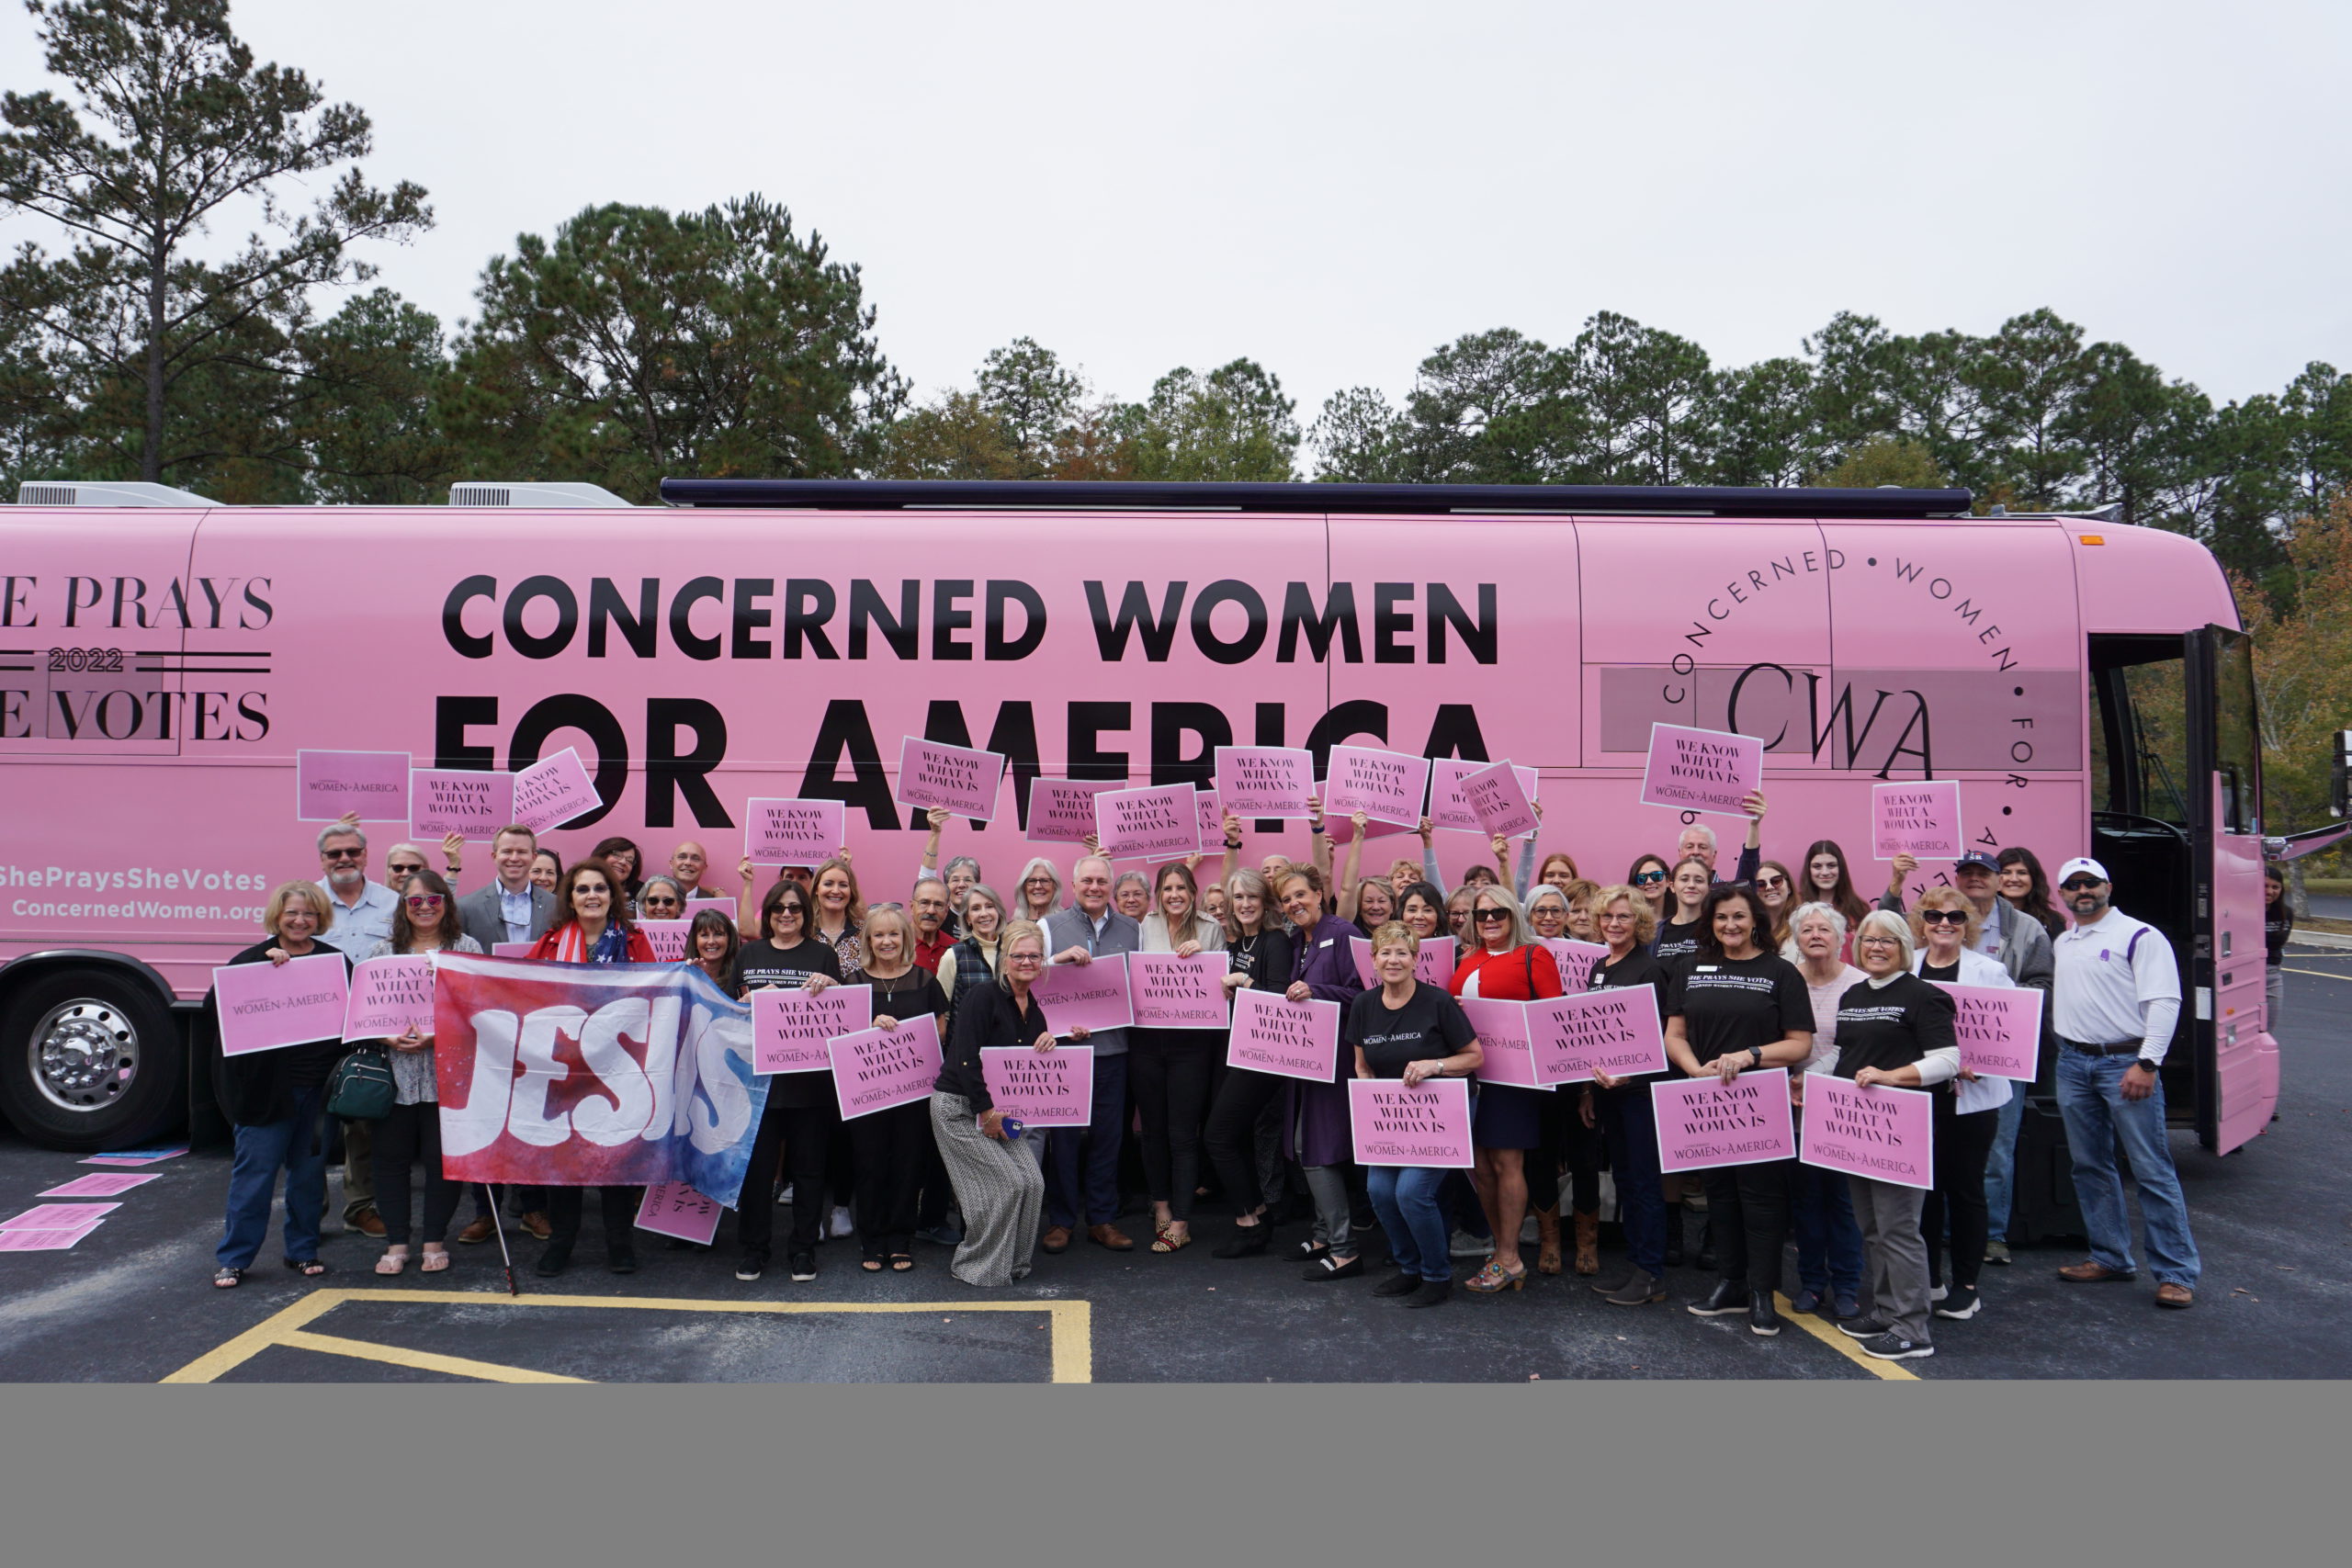 The Big Pink Bus Heads Across the South